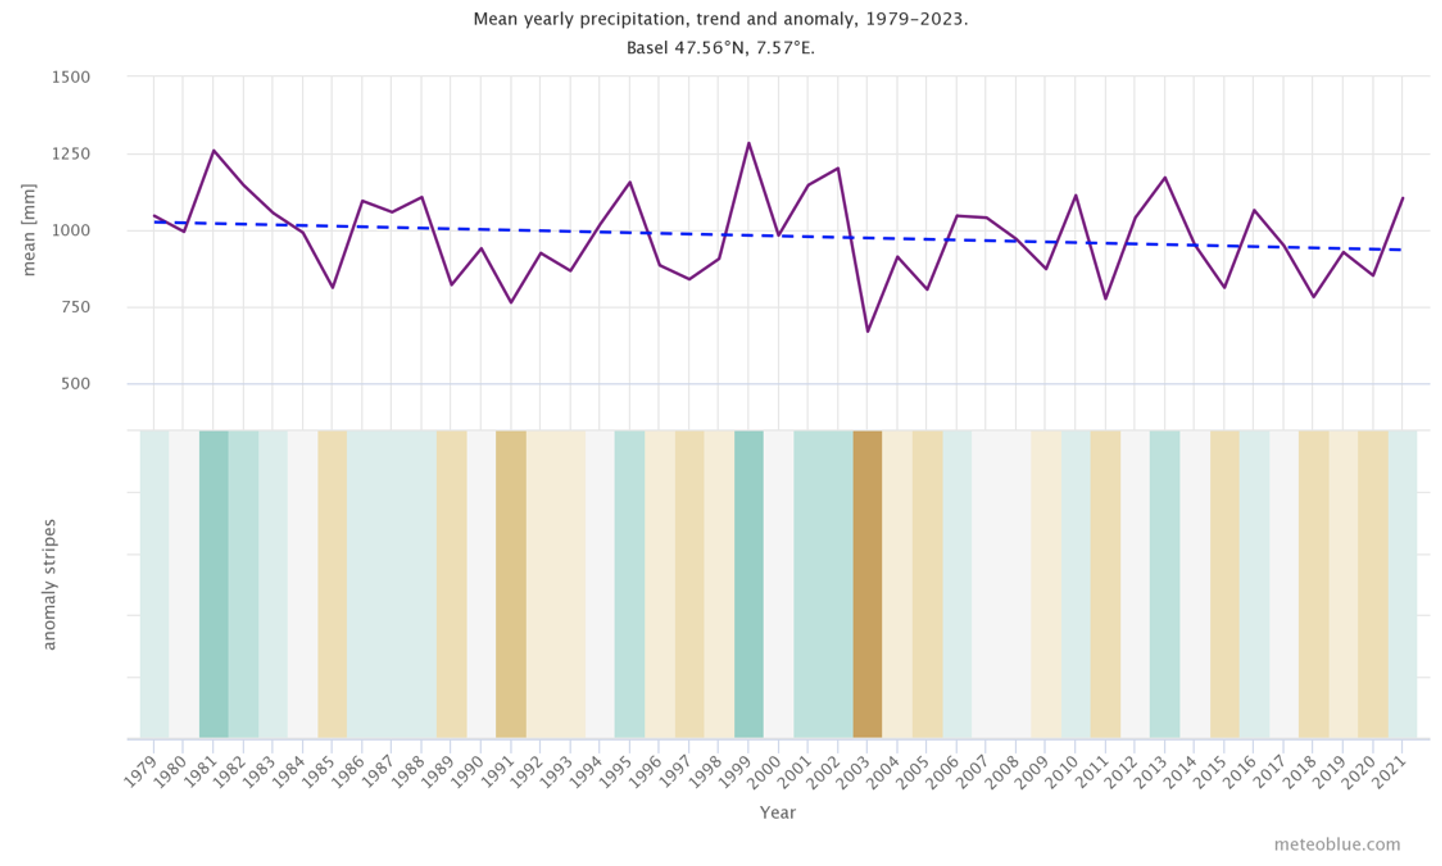 Mean yearly precipitation, trend and anomaly for Basel, Switzerland.